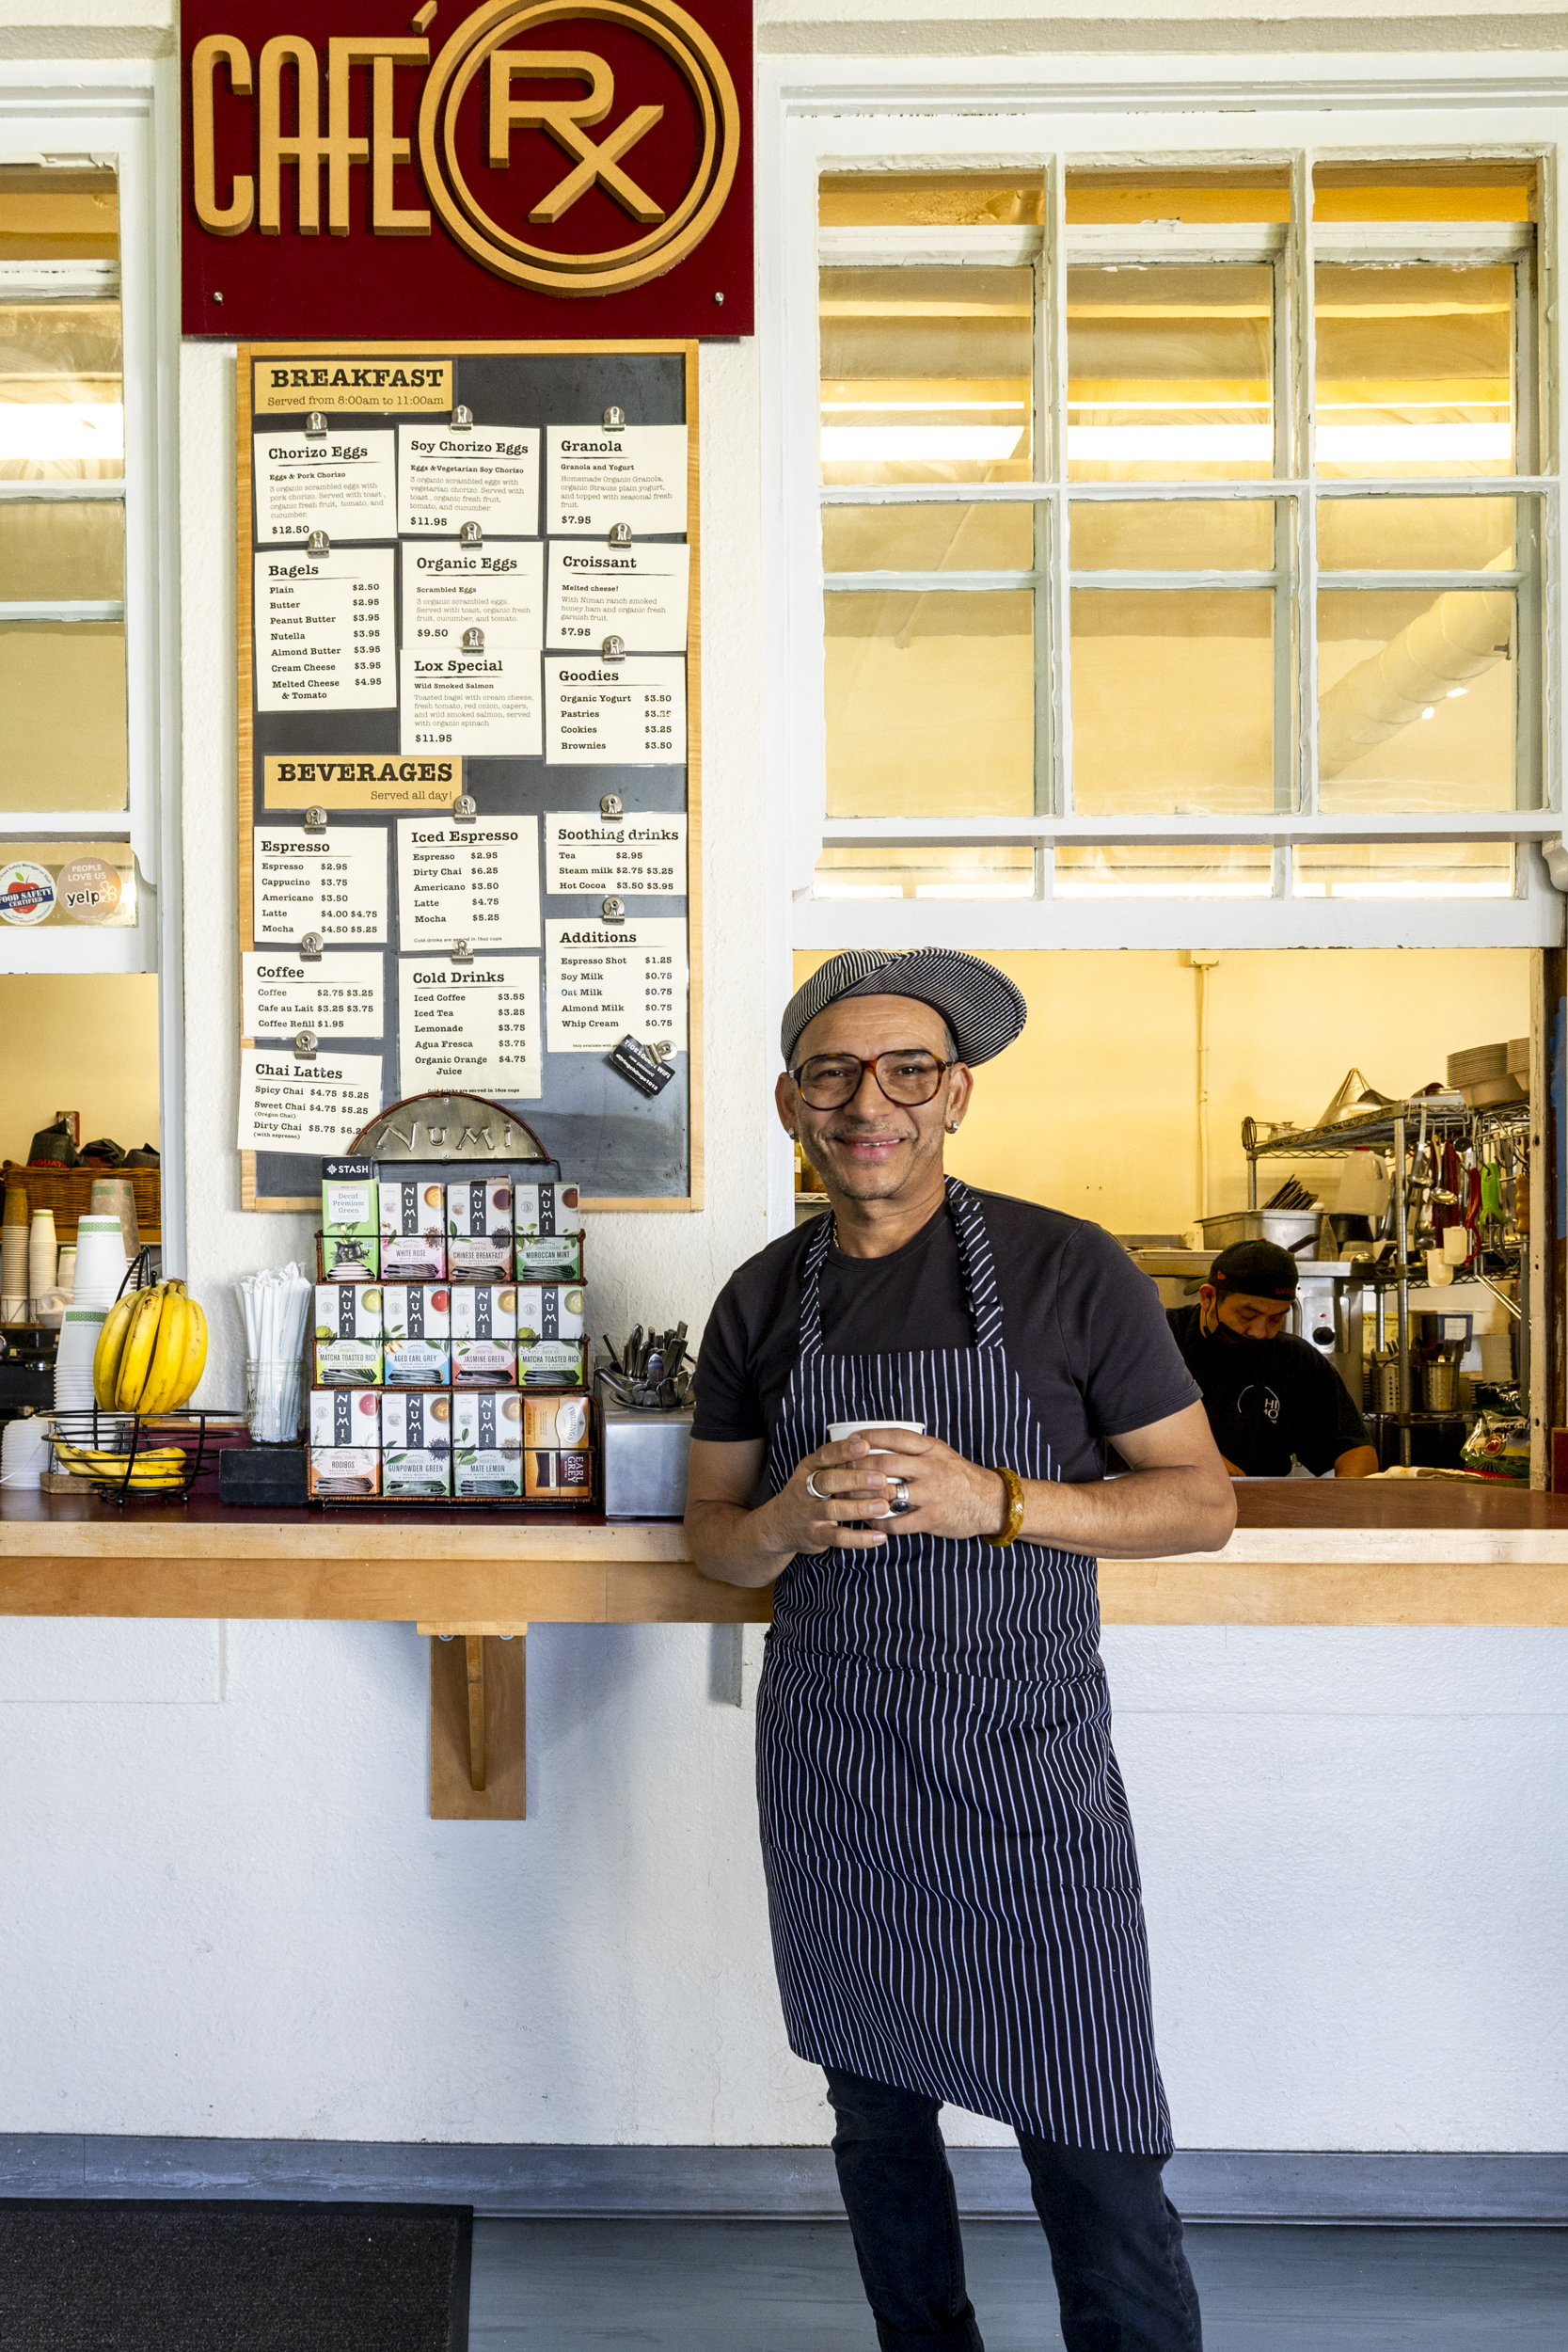 Chef and owner of Cafe RX, Rogelio Colindres, standing in front of the window where customers can order food.